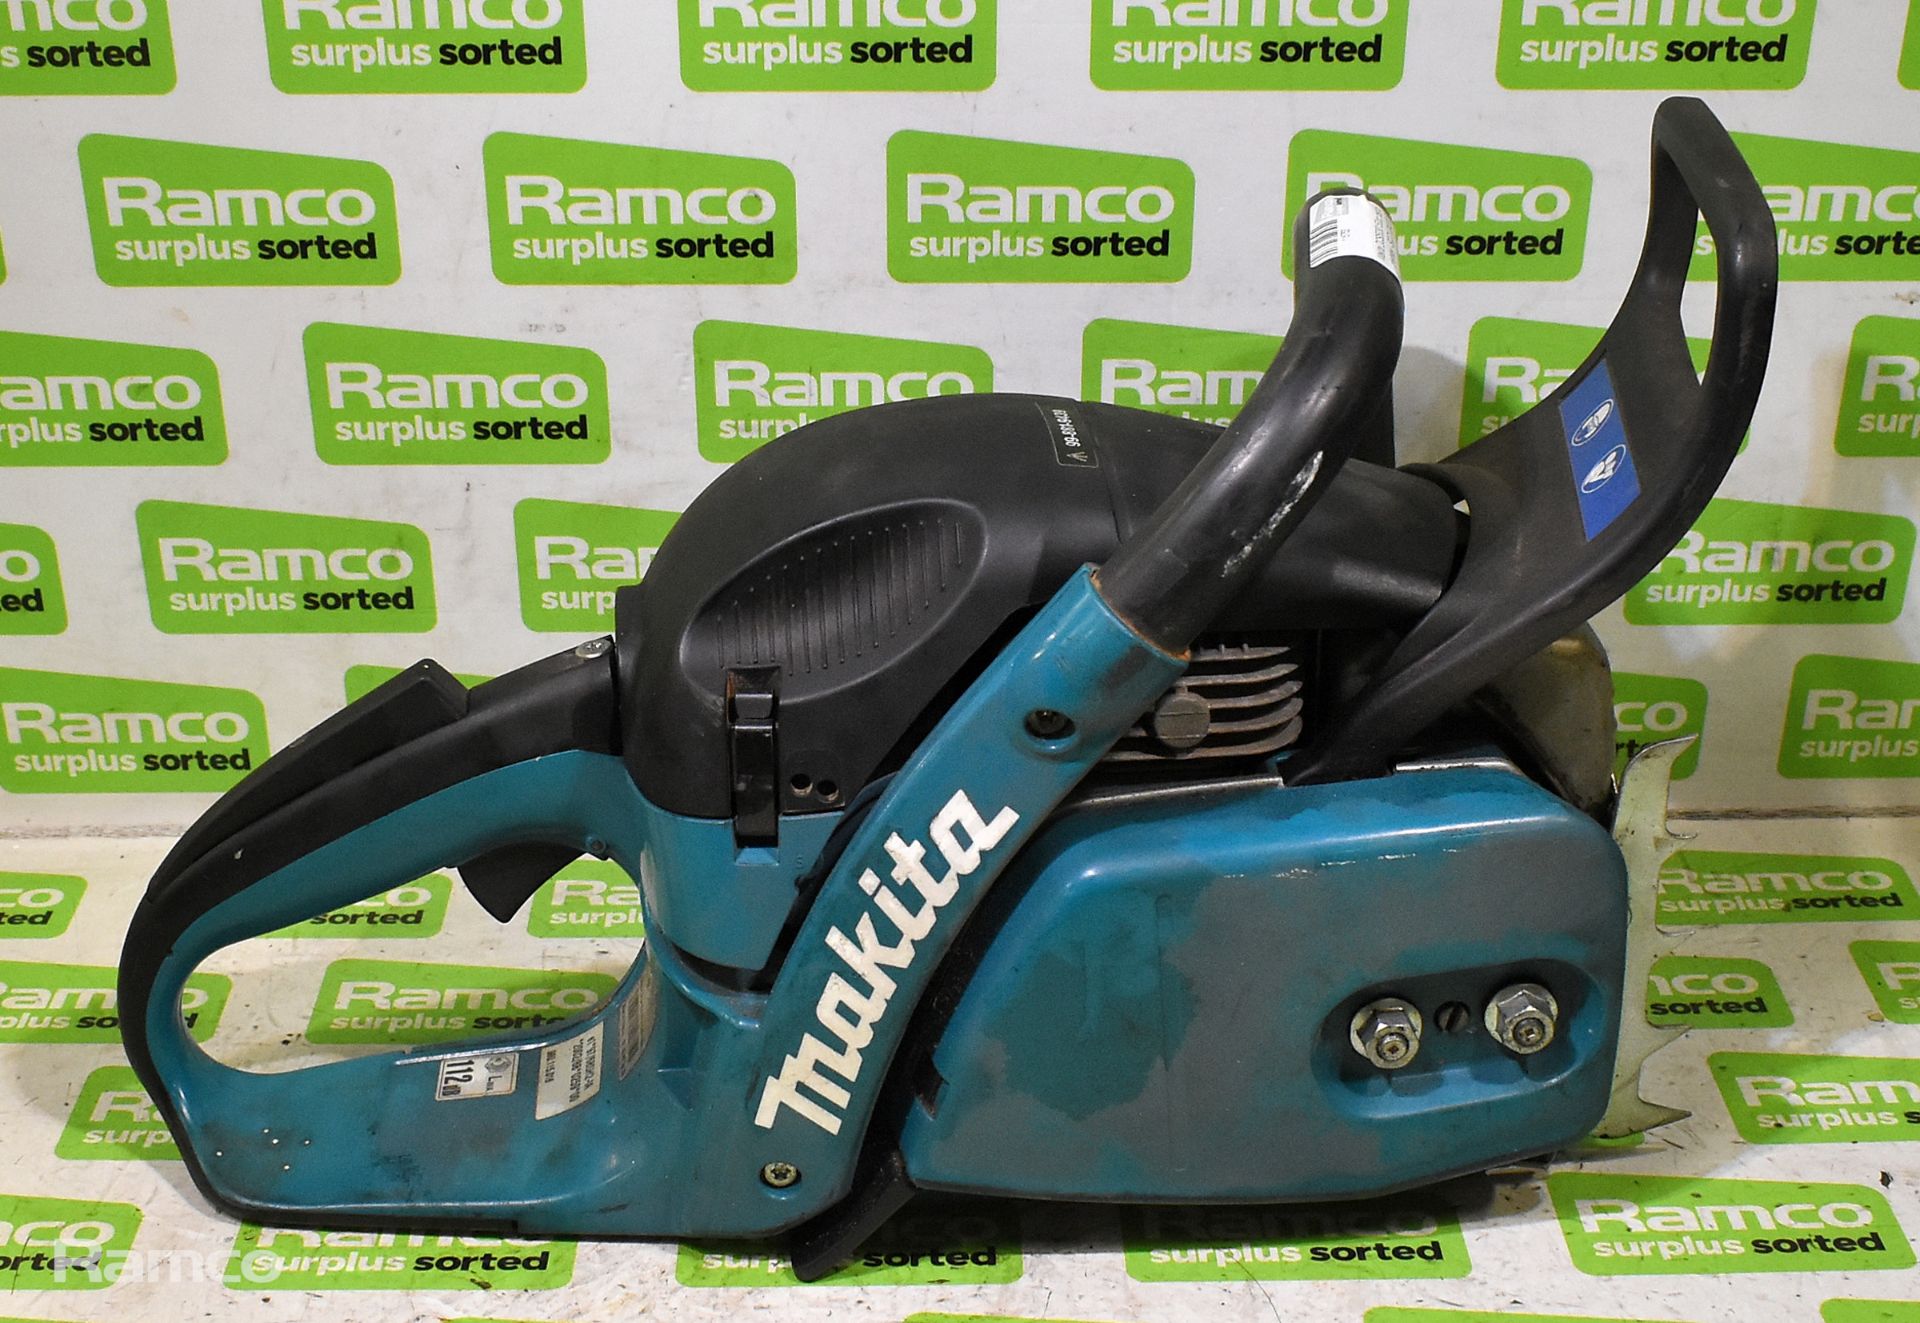 4x Makita DCS5030 50cc petrol chainsaw - BODIES ONLY - AS SPARES AND REPAIRS - Image 3 of 21